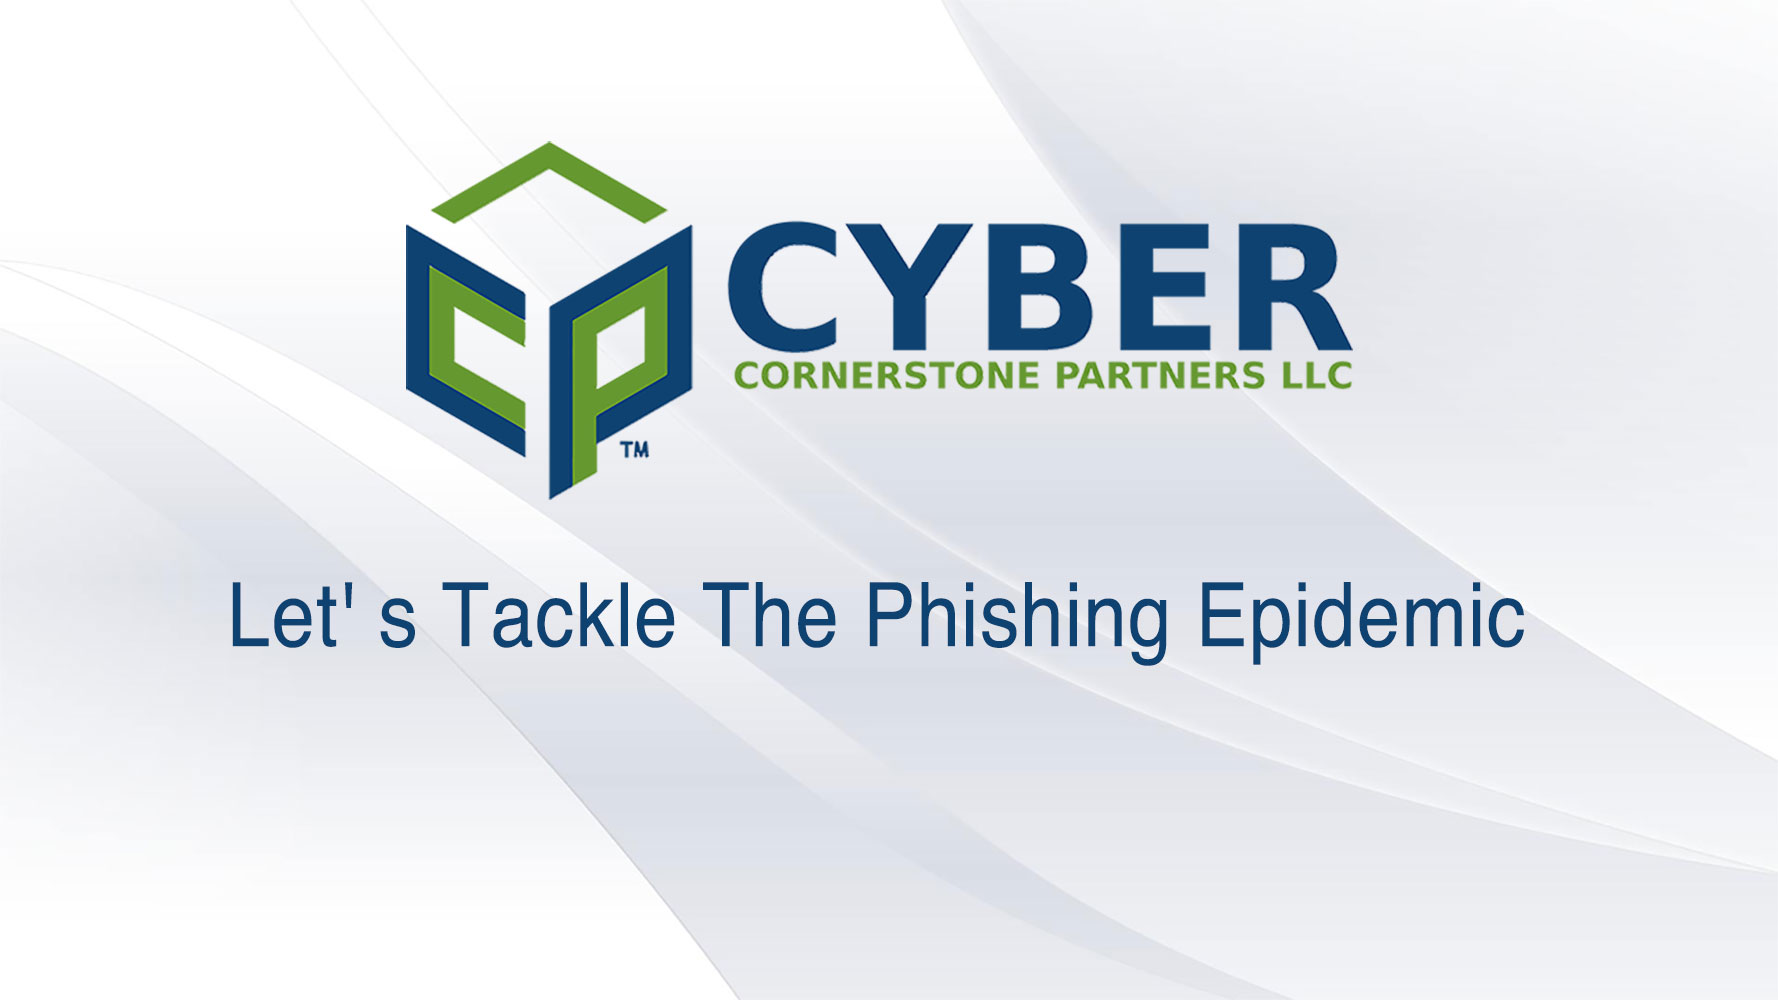 Phishing epidemic CP Cyber Security Consulting and Solutions Firm Denver Colorado